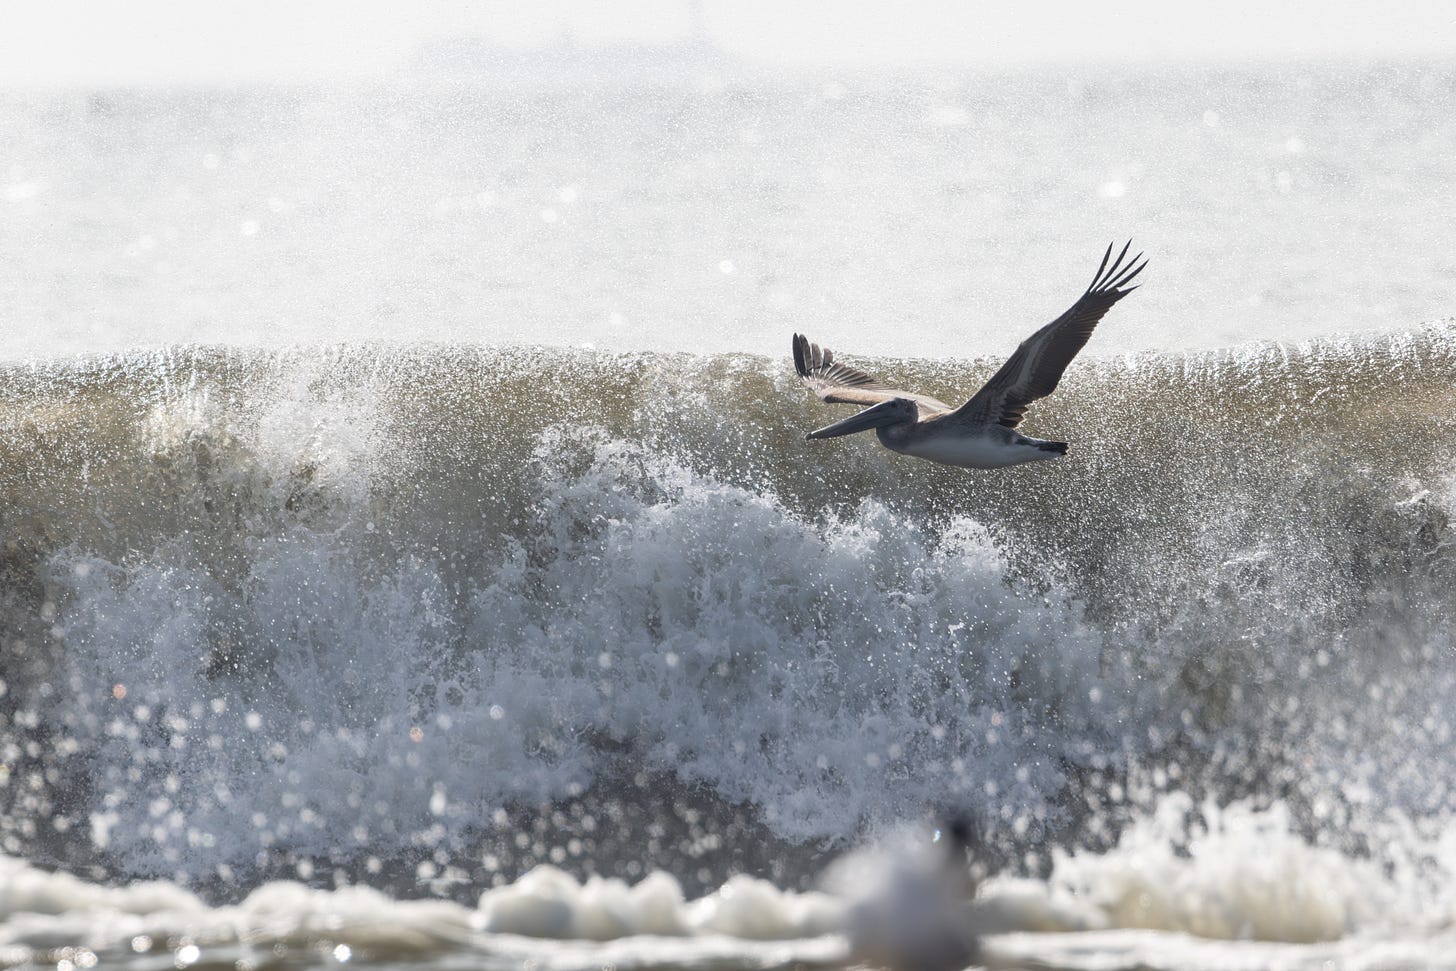 a brown pelican - big brown bird with a huge beak and a white belly, flying left as a wave crashes behind it.